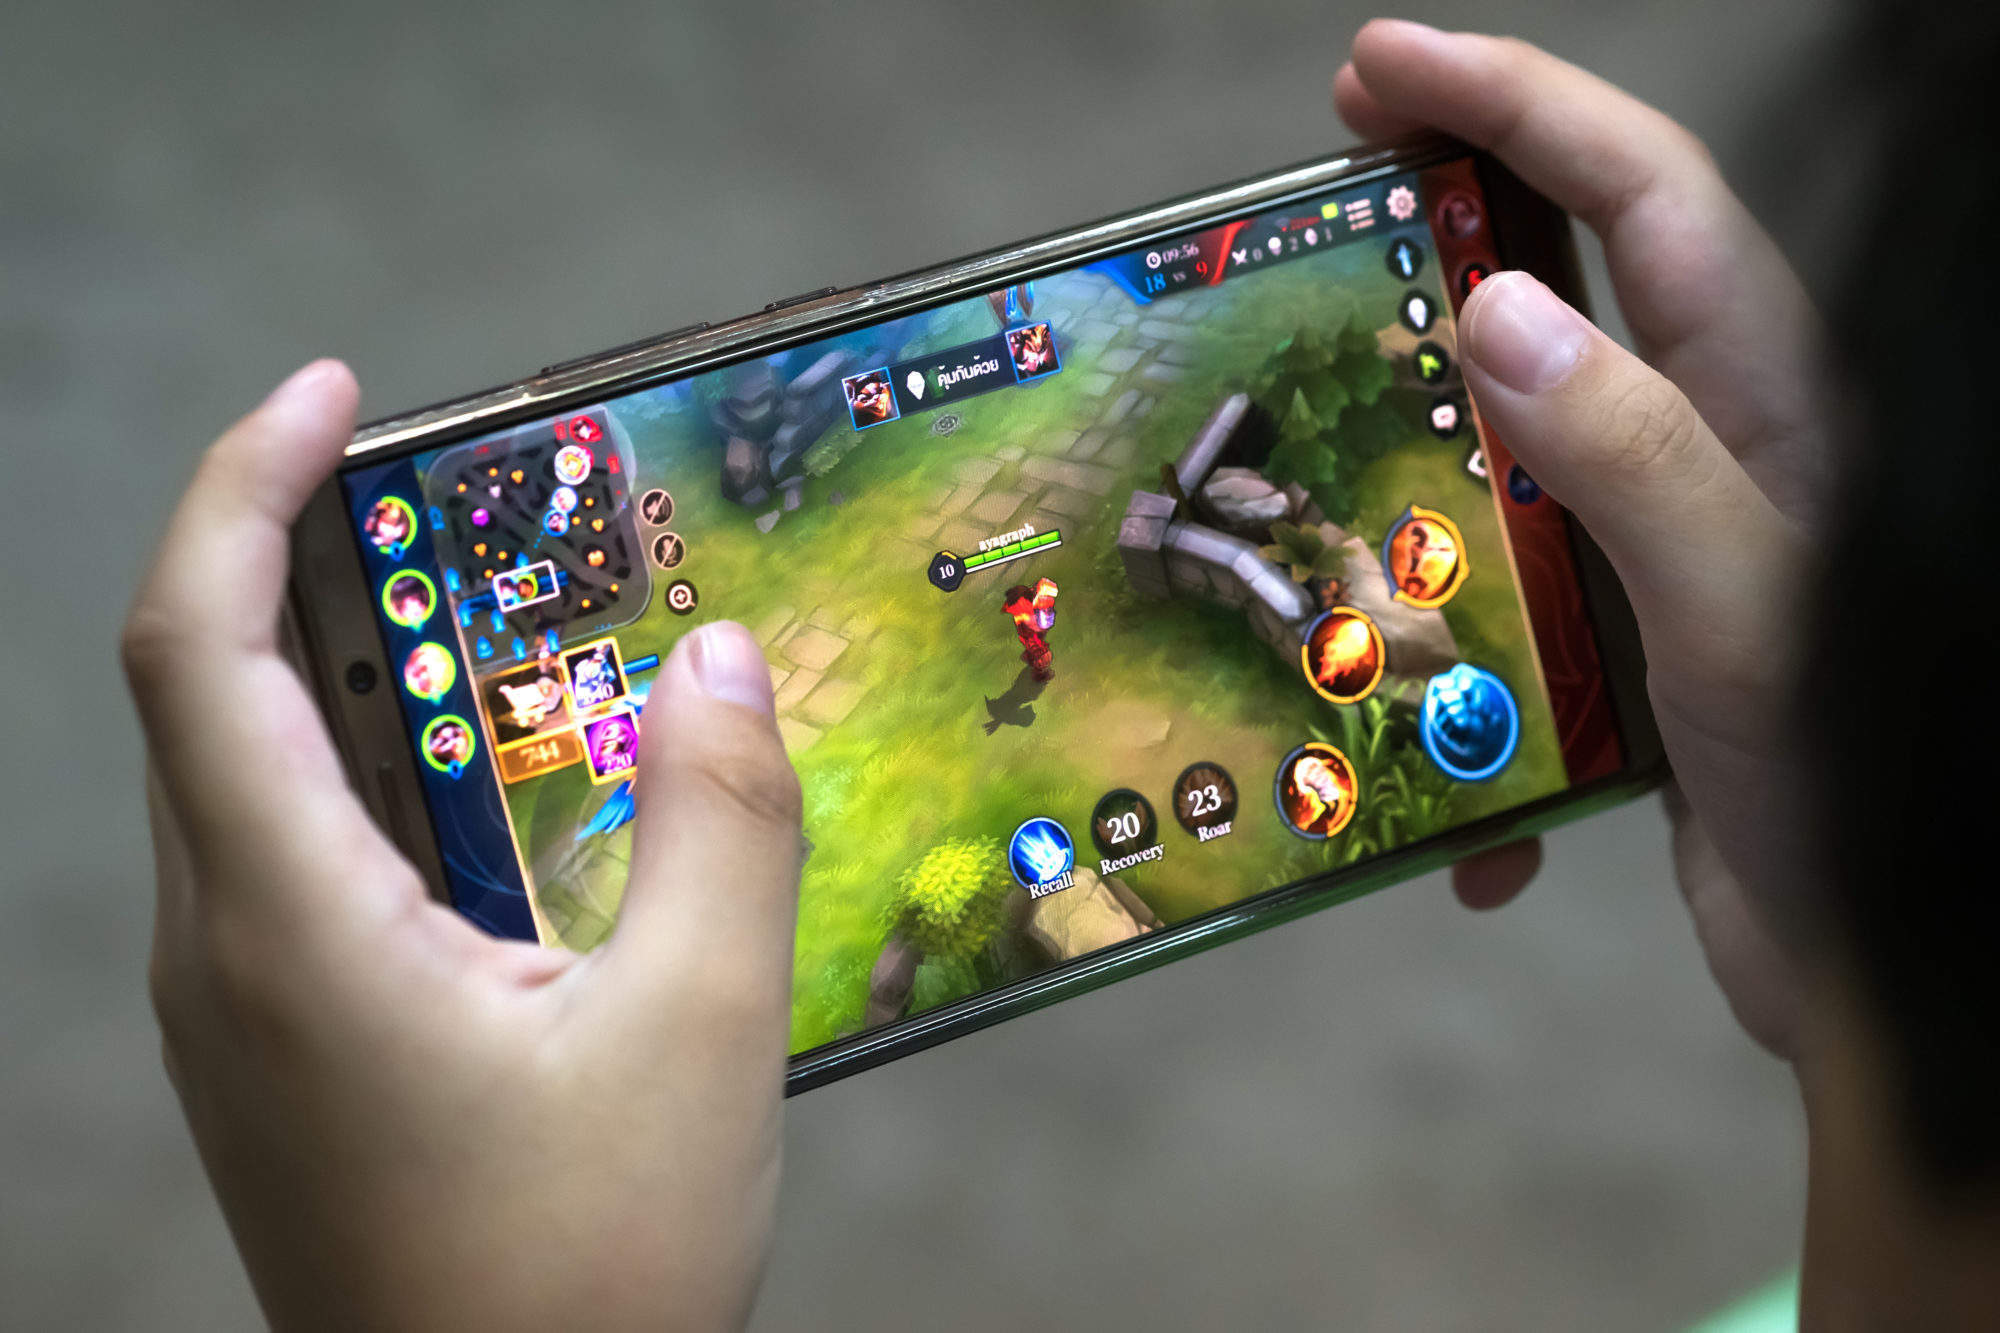 Square Enix mobile games struggle as gamers flock to freetoplay model